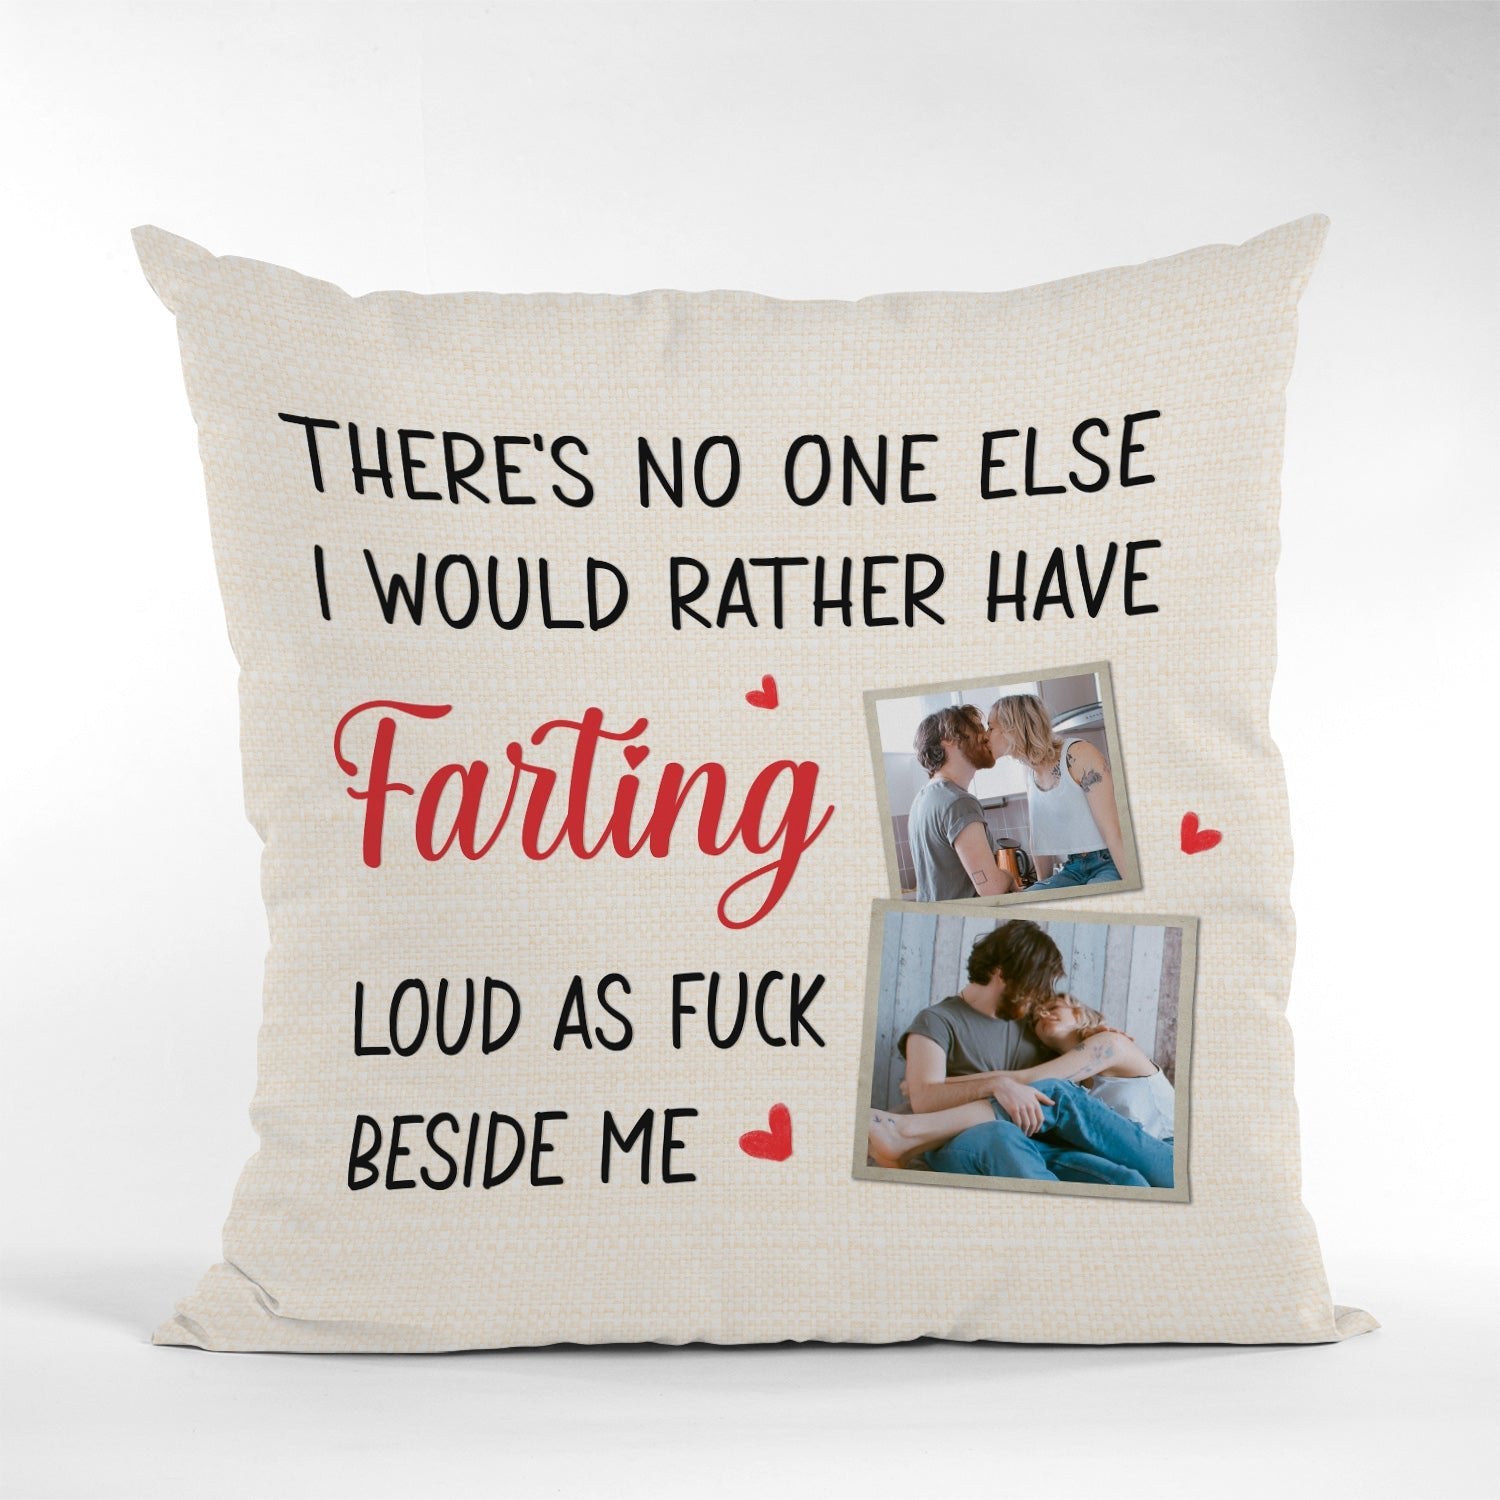 These's No One Else I Would Rather Have Snoring, Custom Photo Pillow